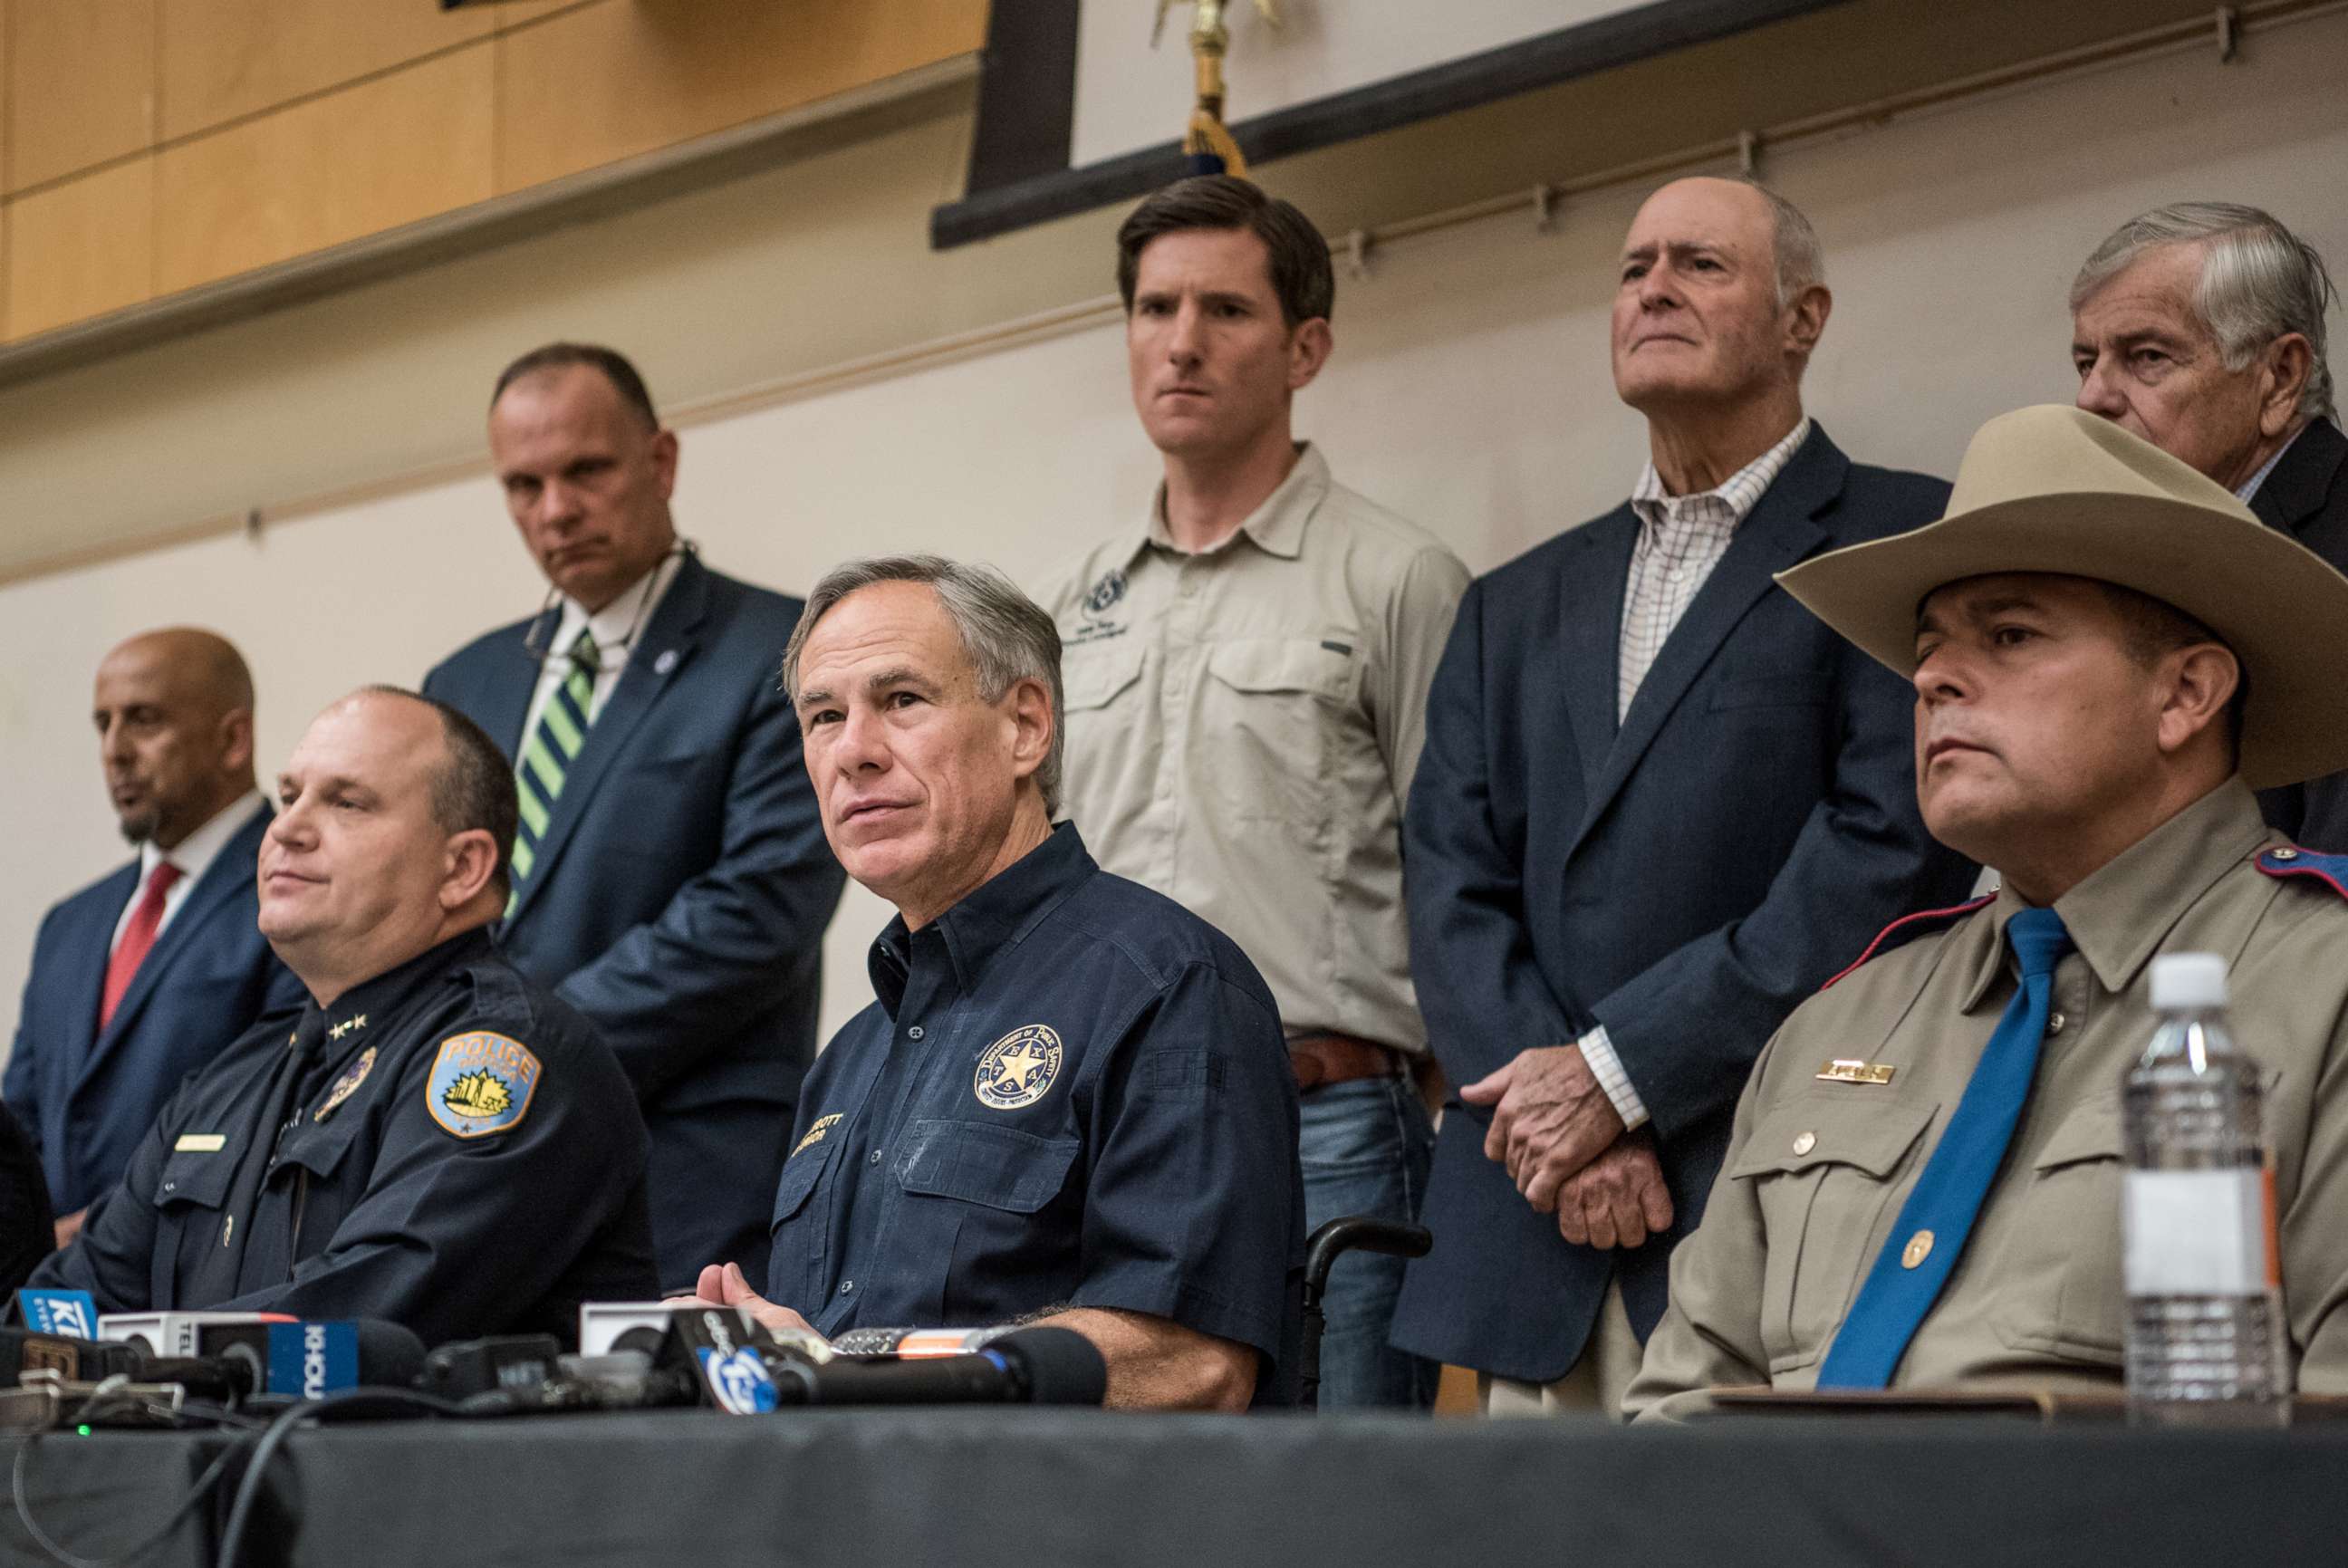 PHOTO: Texas Gov. Greg Abbott holds a press conference with local and federal law enforcement at the University of Texas of the Permian Basin following a deadly shooting spree on Sept. 1, 2019, in Odessa, Texas.